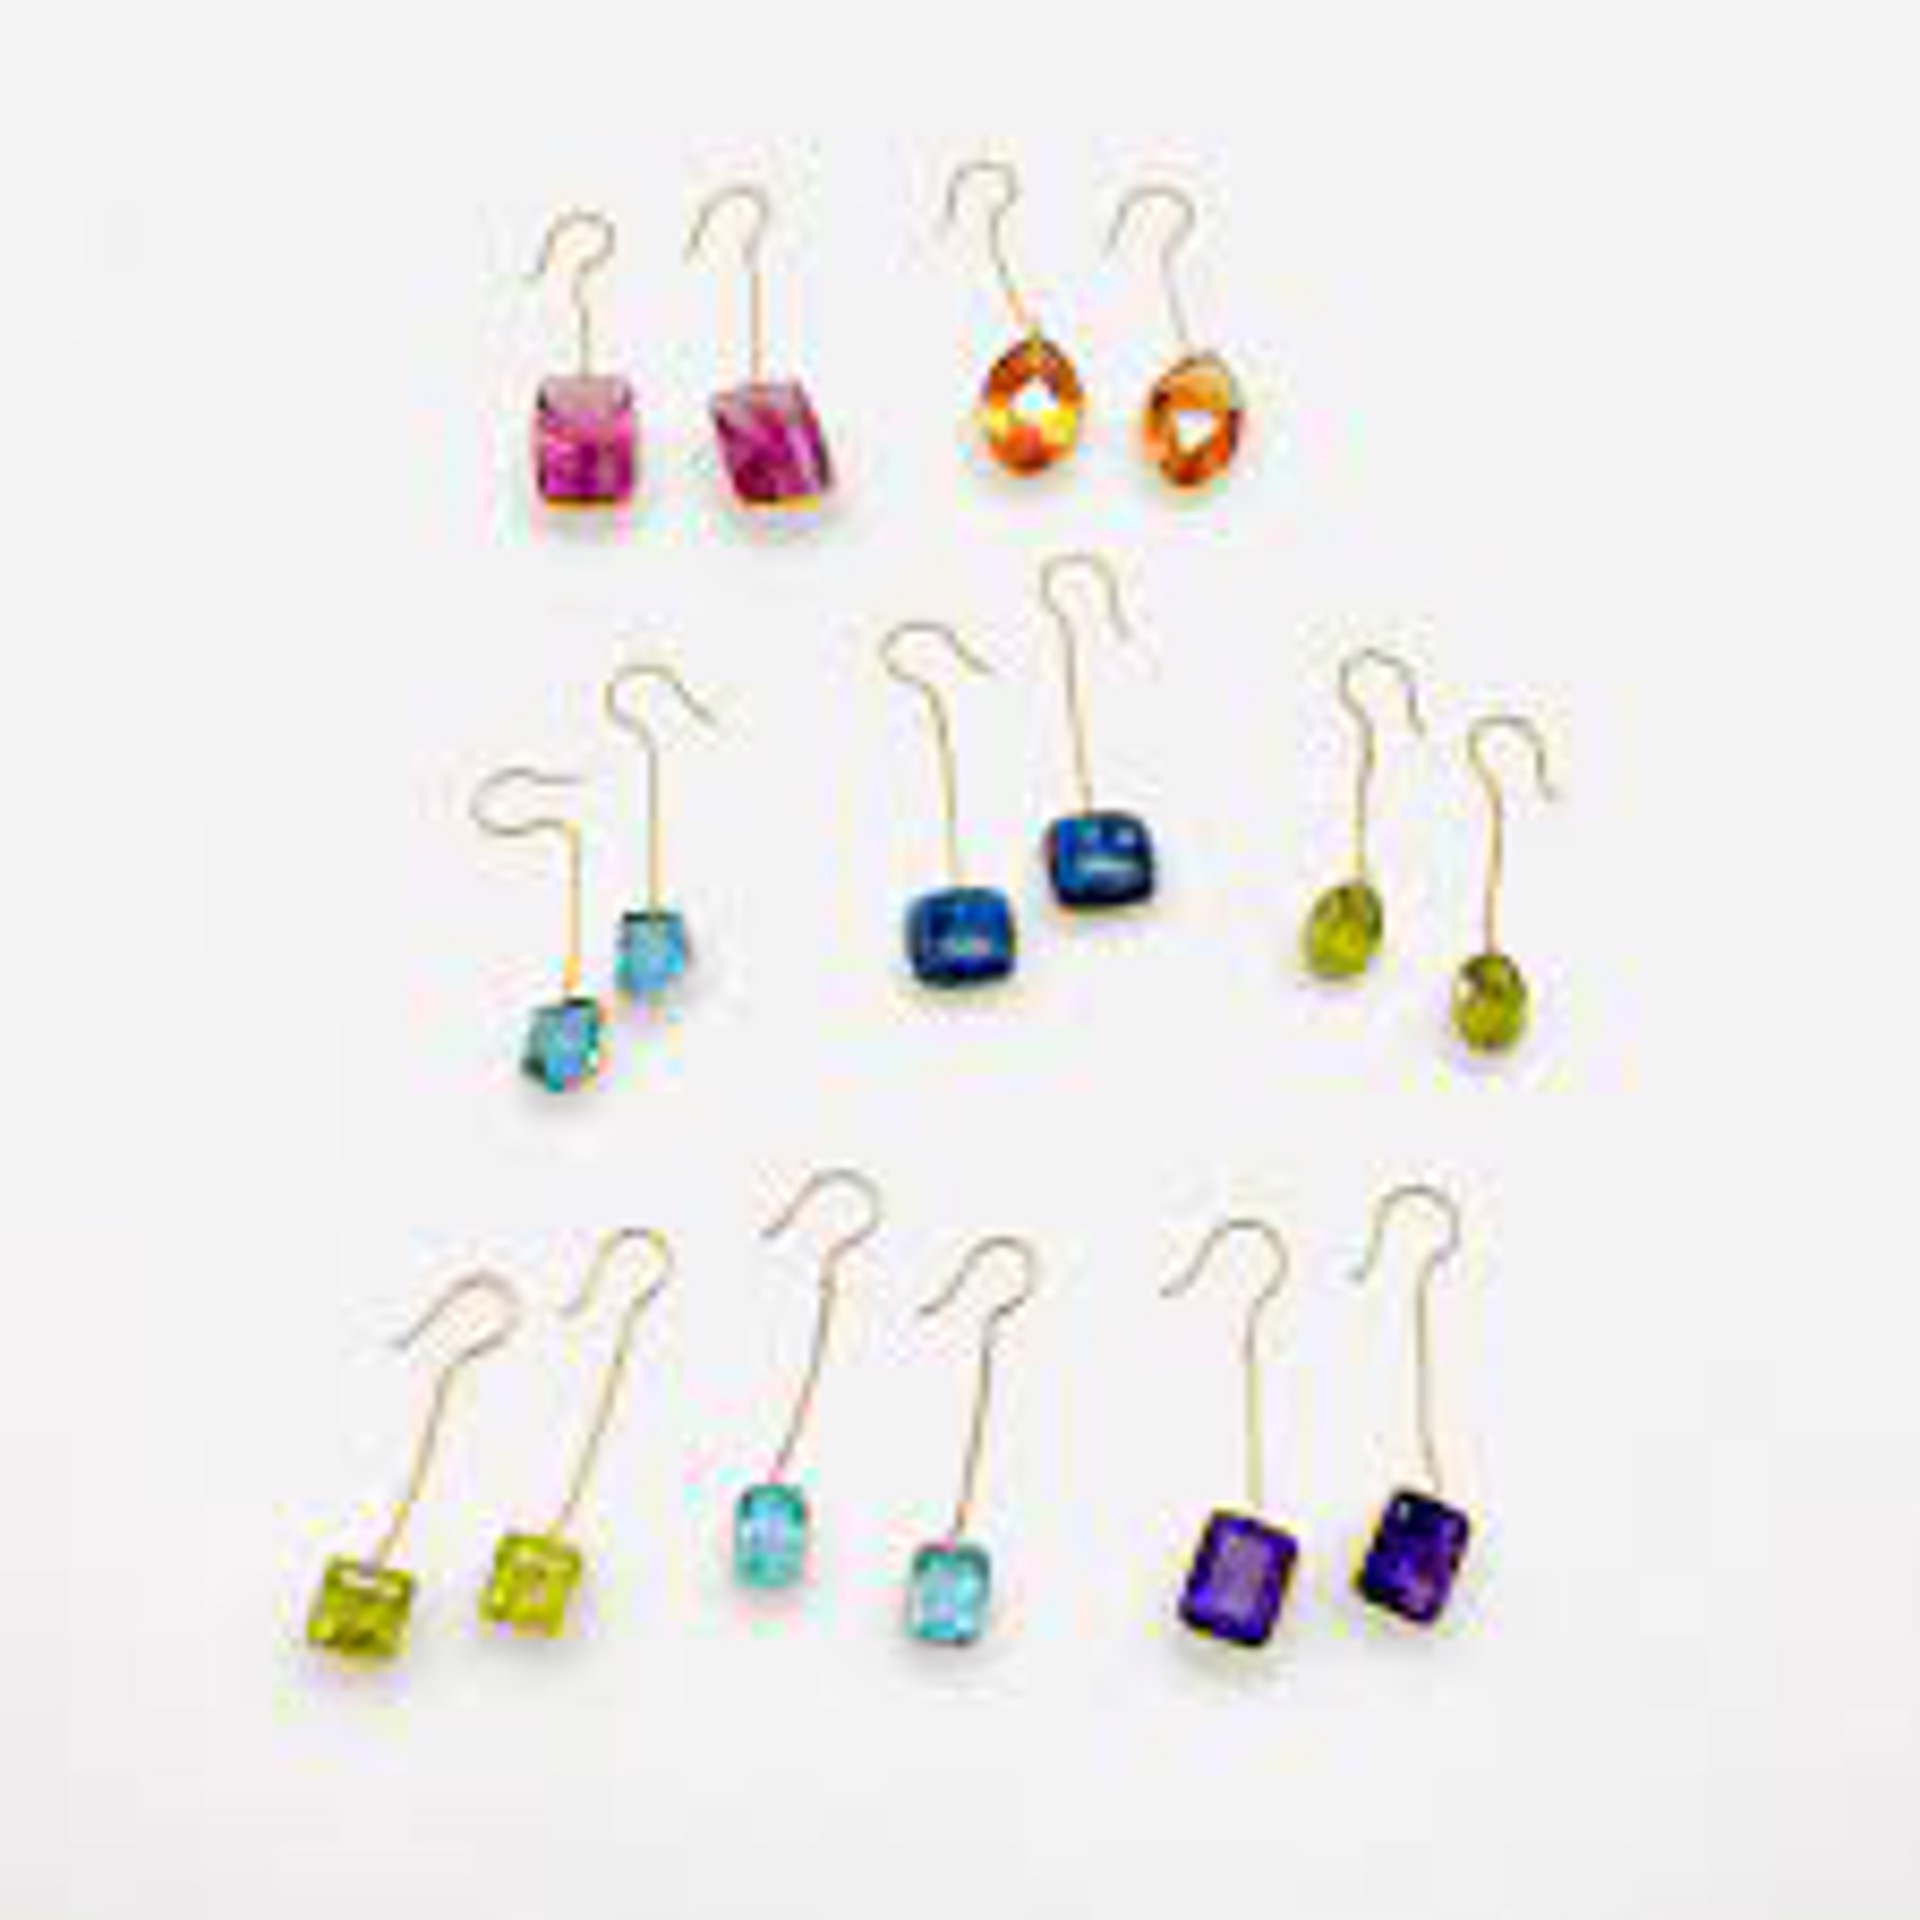 Natural Zircon 10.4cts tw Trillion Cut Earrings 18K Gold by Mara Labell